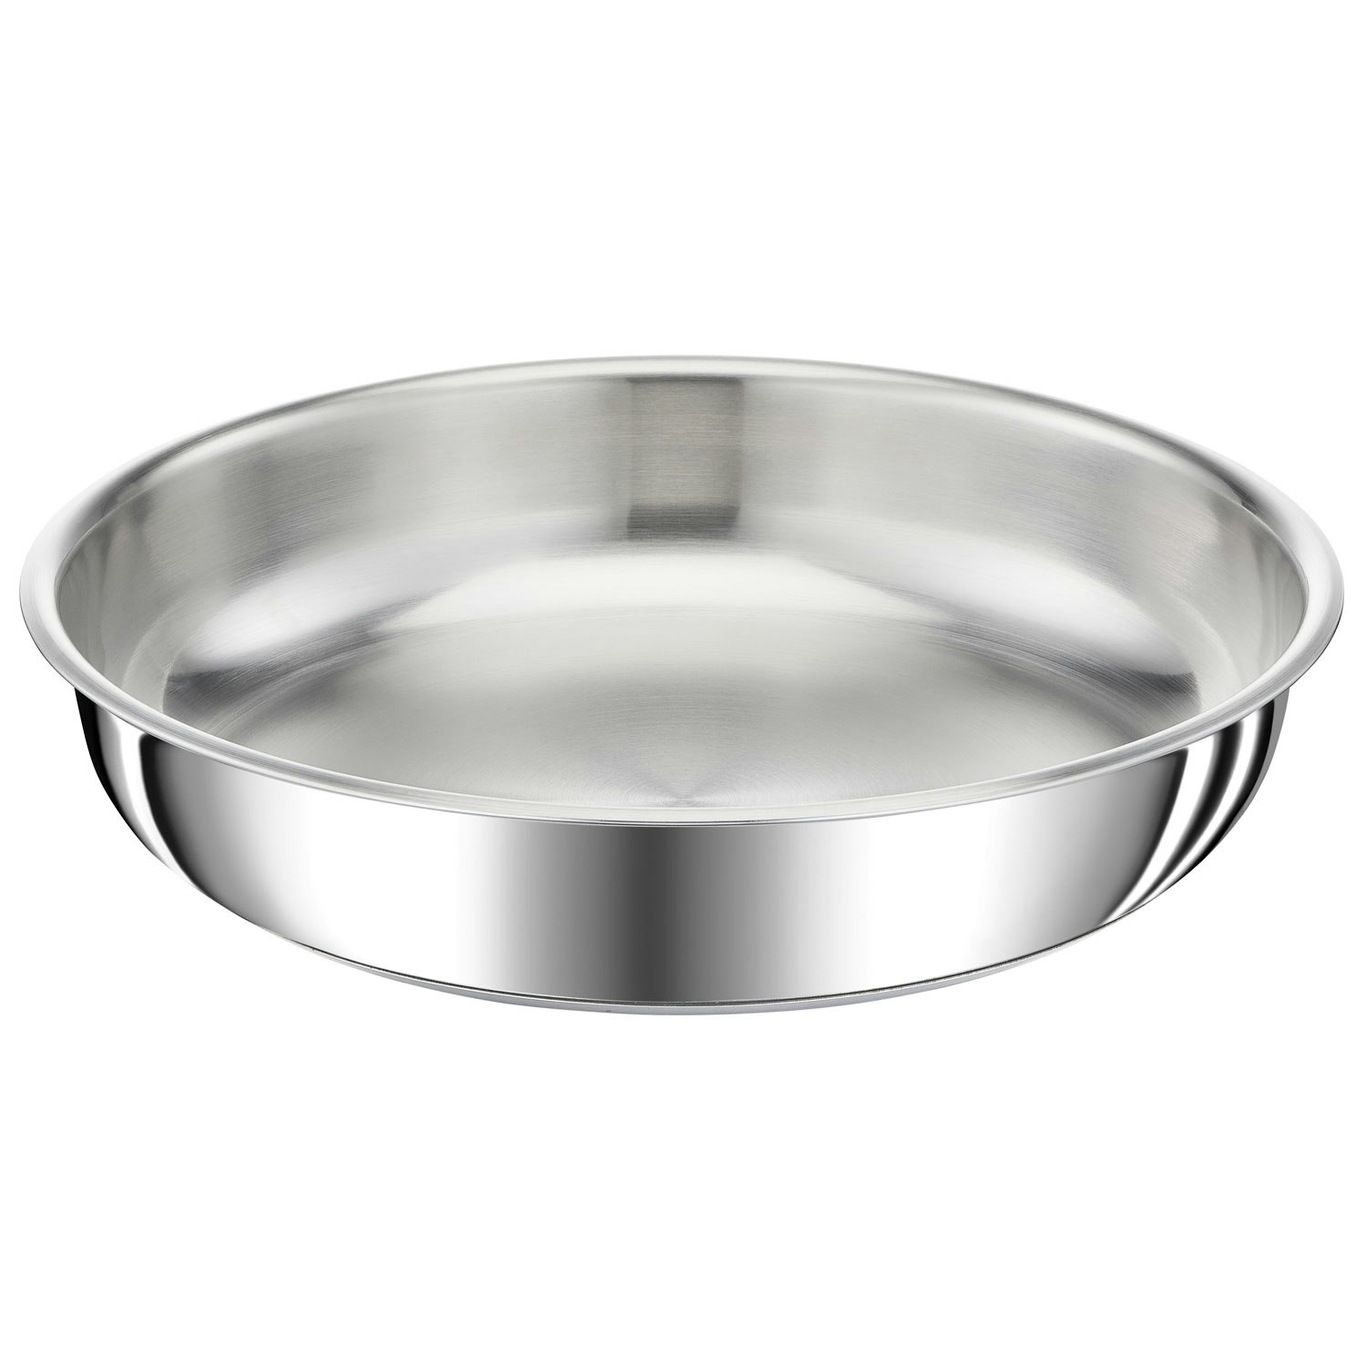 3 Pans - Removable handle - Stainless steel